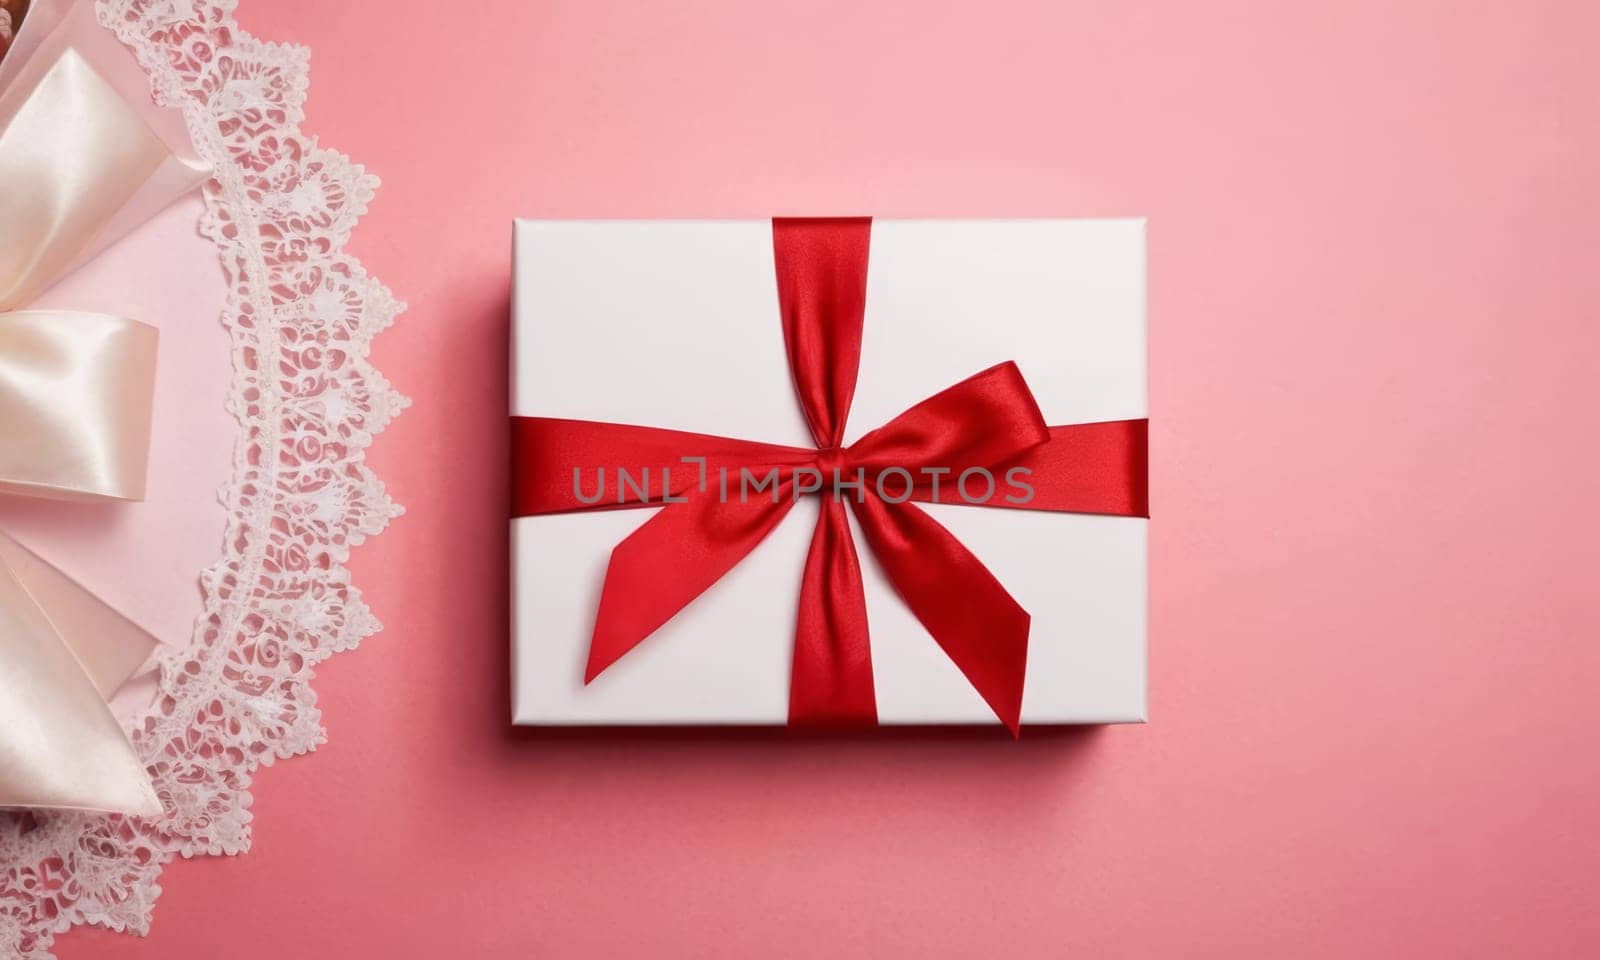 Holiday gifts in elegant packaging by Andre1ns